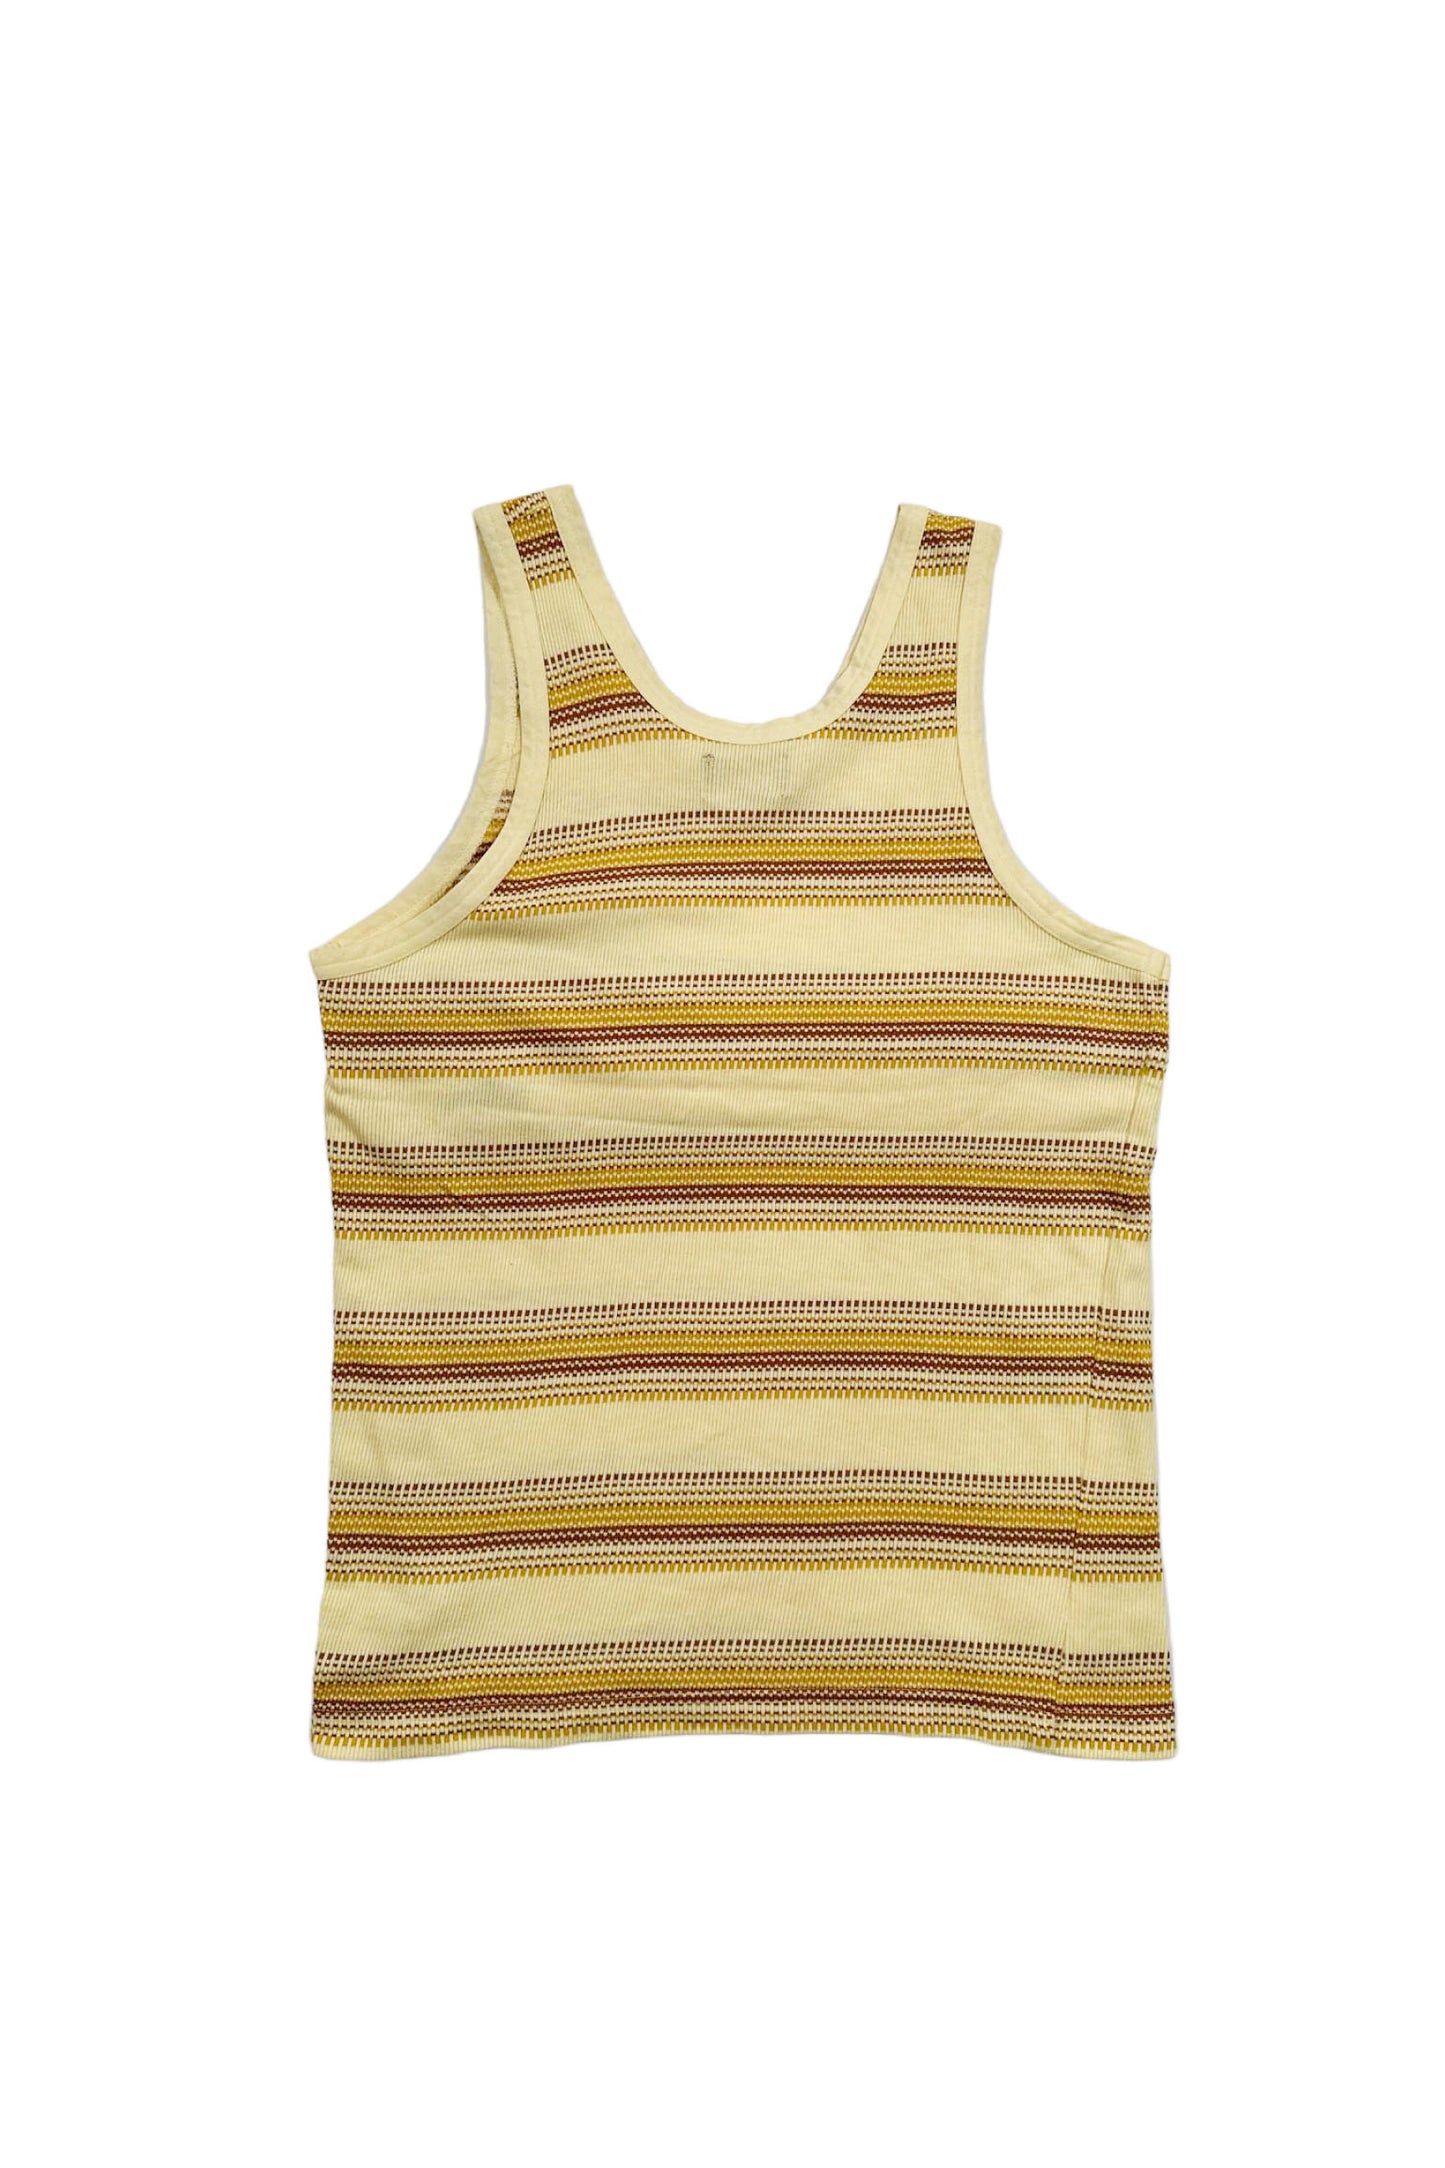 90's Made in USA Volcom tank top